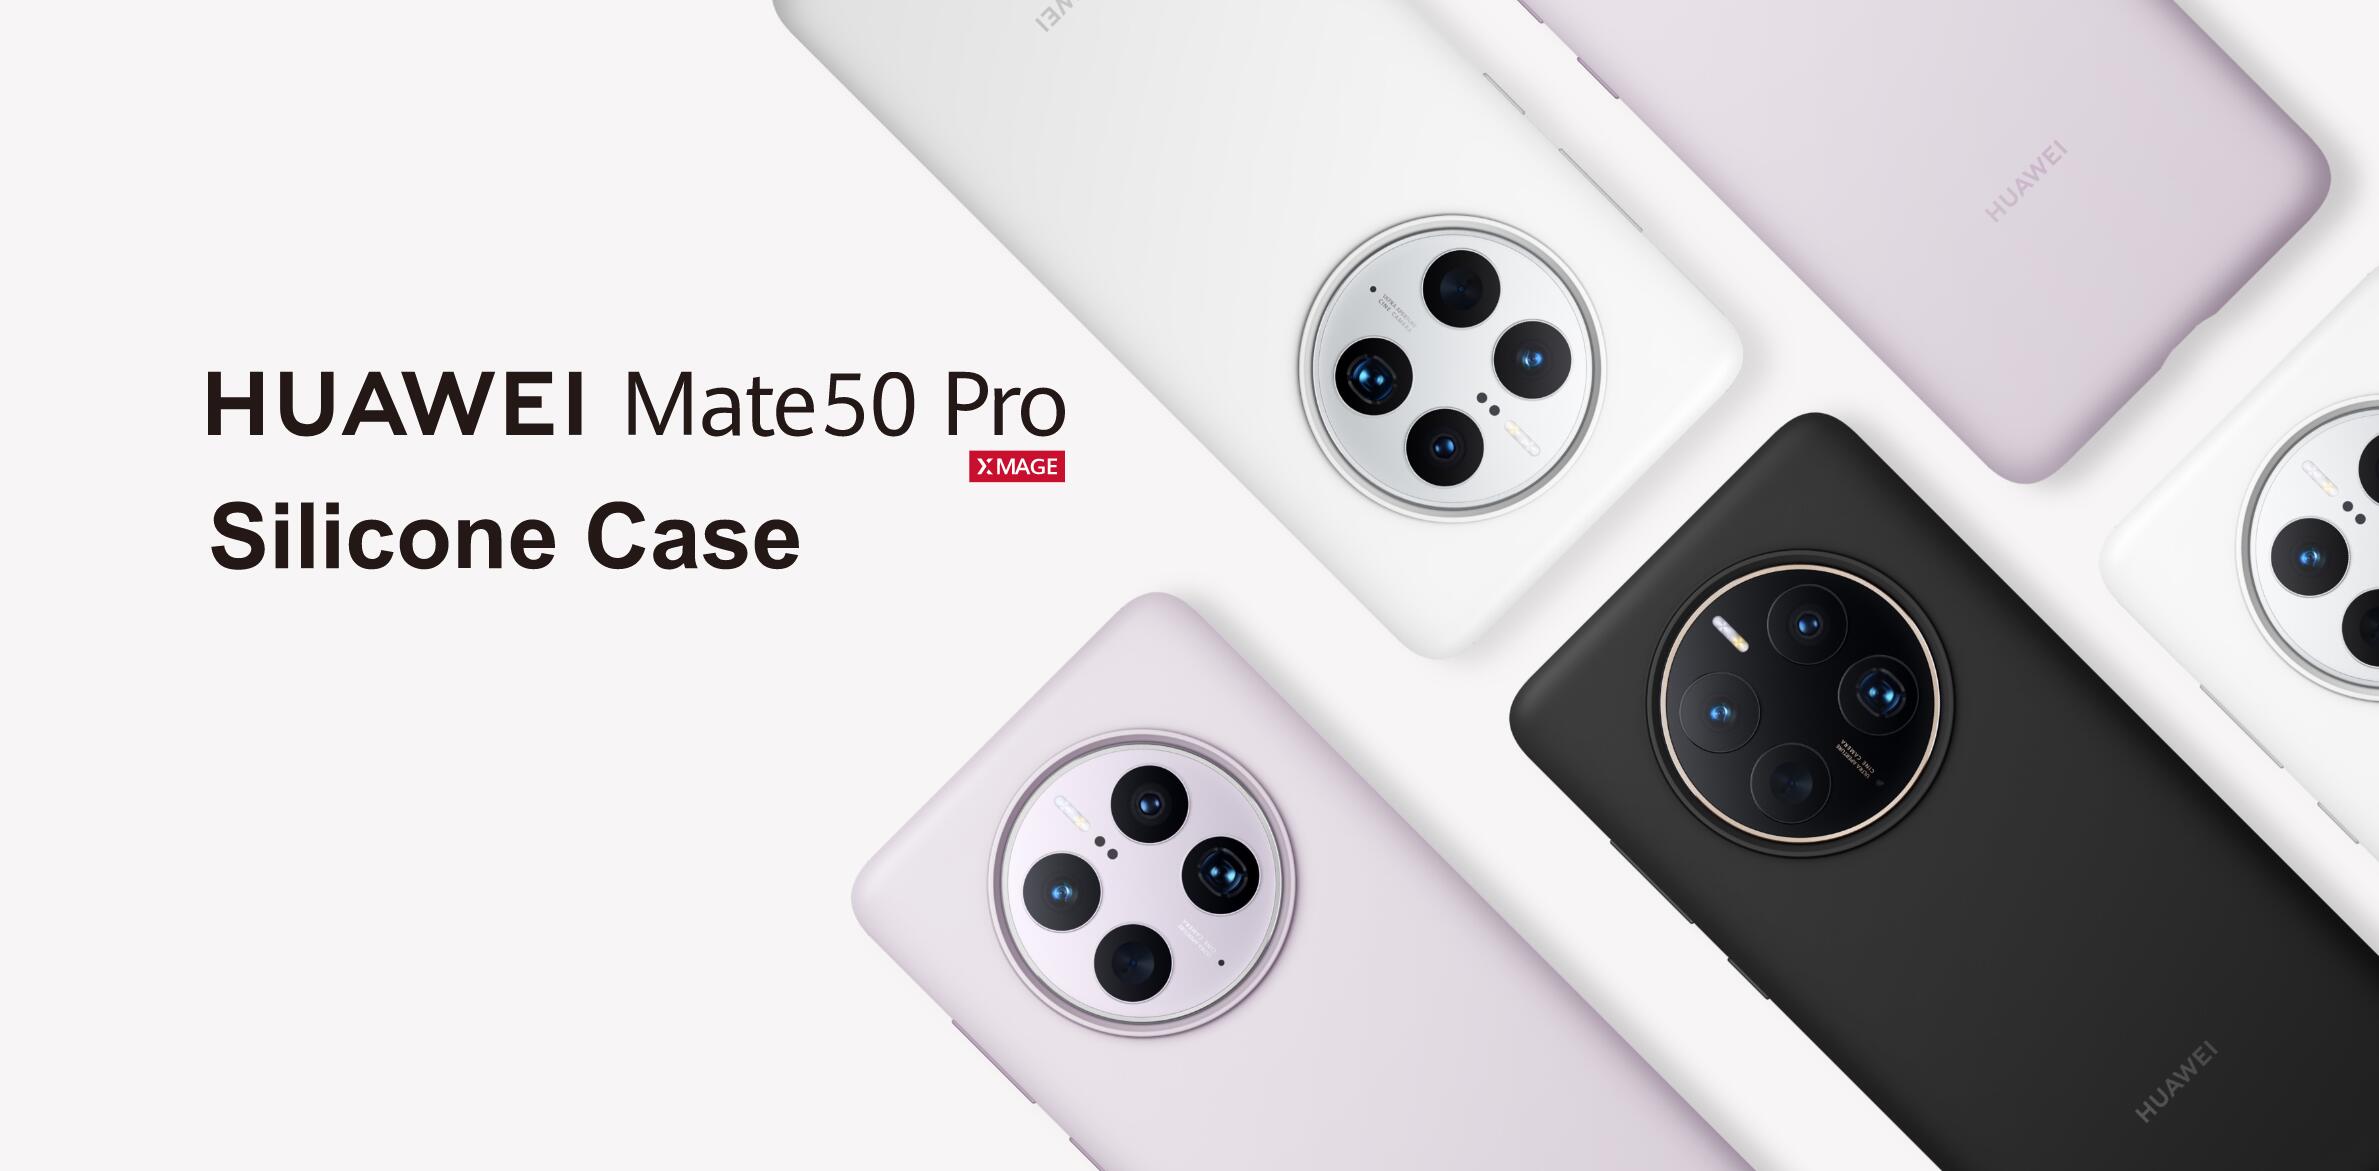  Huawei Mate 50 Pro Silicone Case 